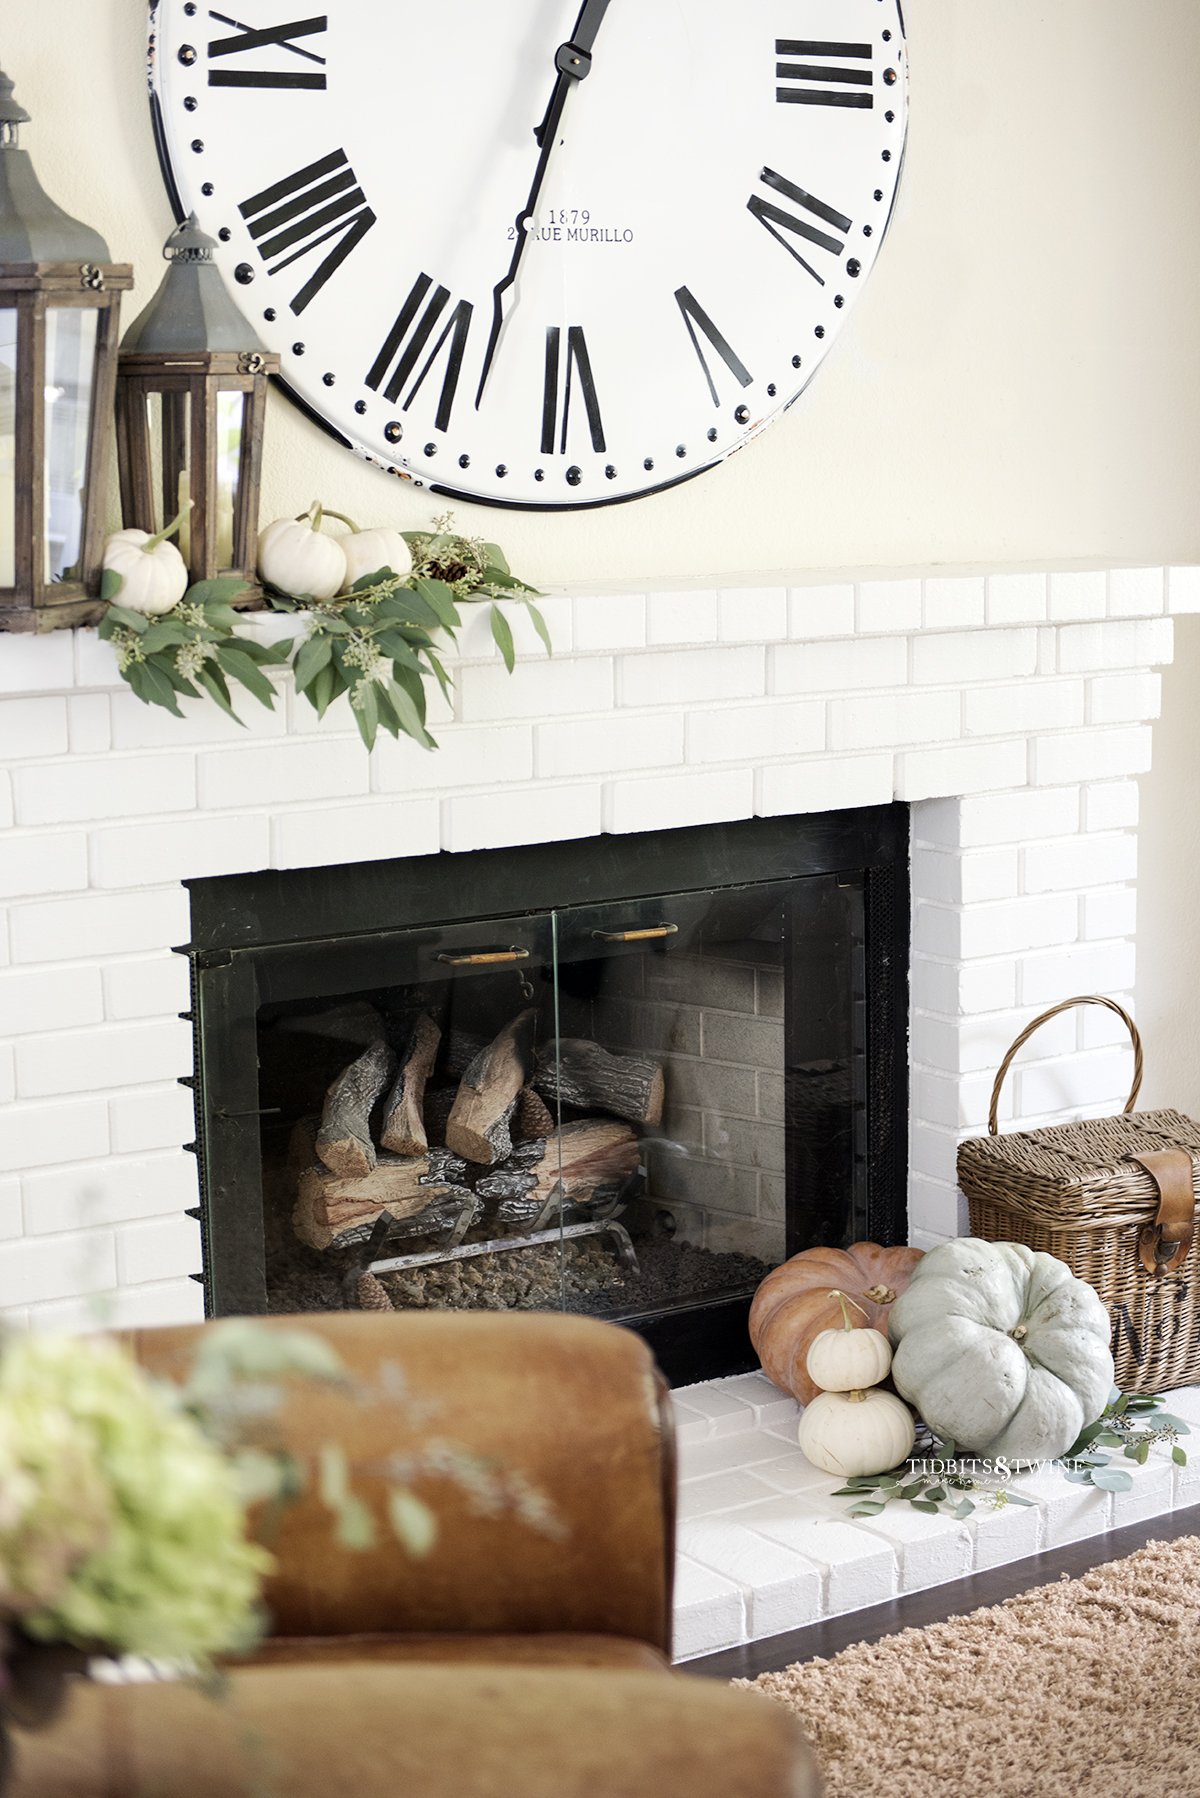 white brick fireplace mantel with large french clock above decorated for fall with pumpkins and eucalyptus